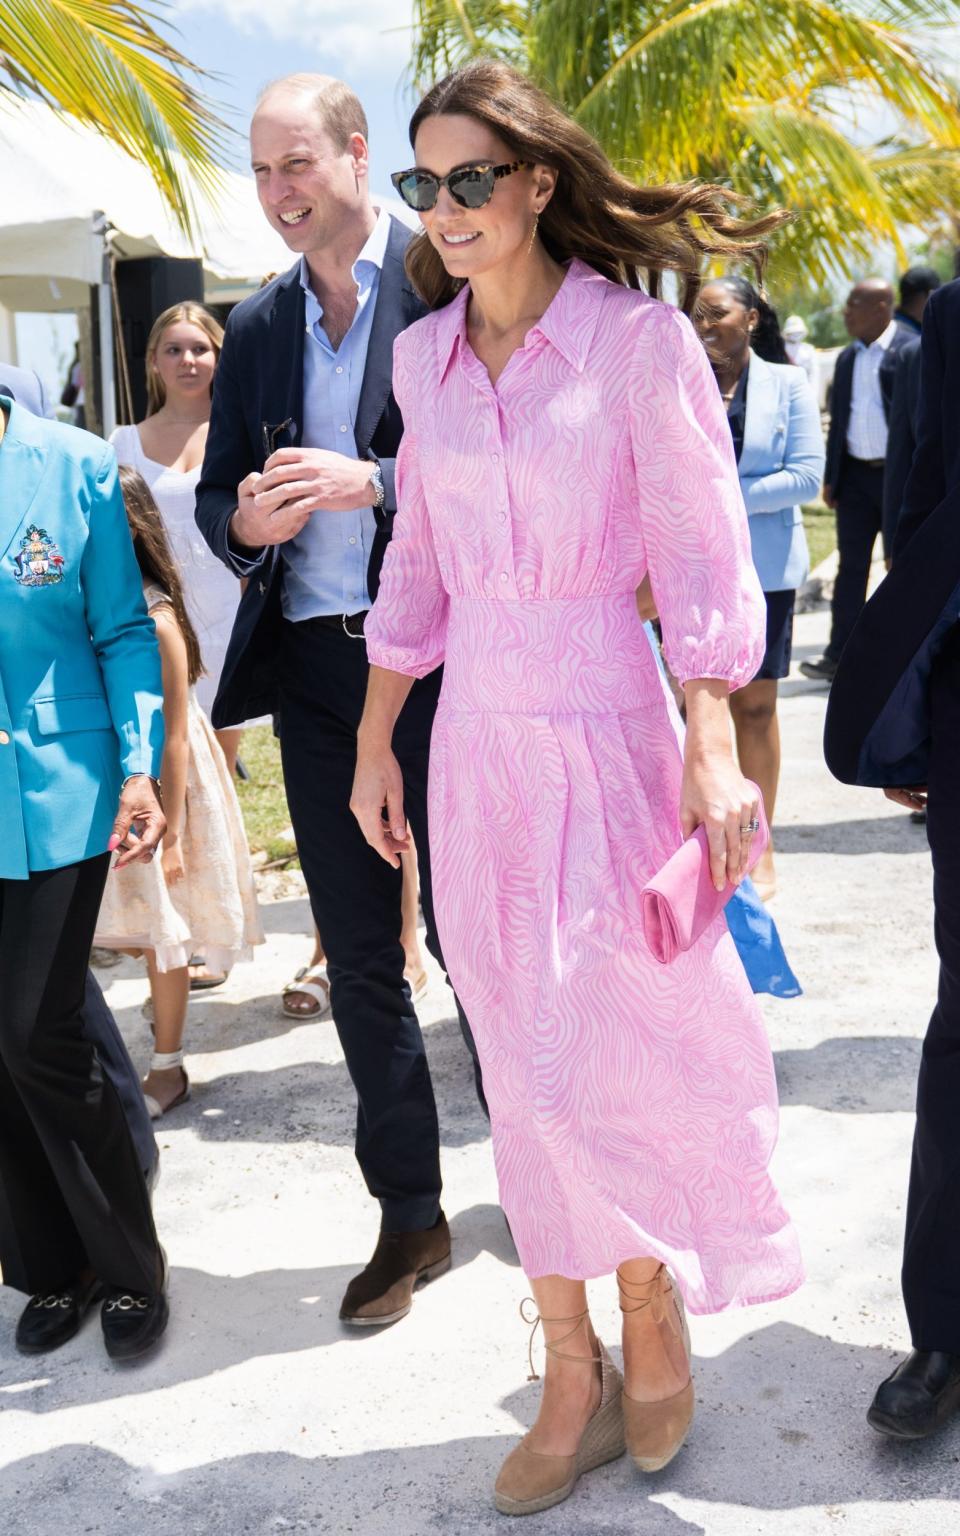 Catherine, Duchess of Cambridge wears a pink dress by Rixo while visiting Abaco on March 26, 2022 in Great Abaco, Bahamas